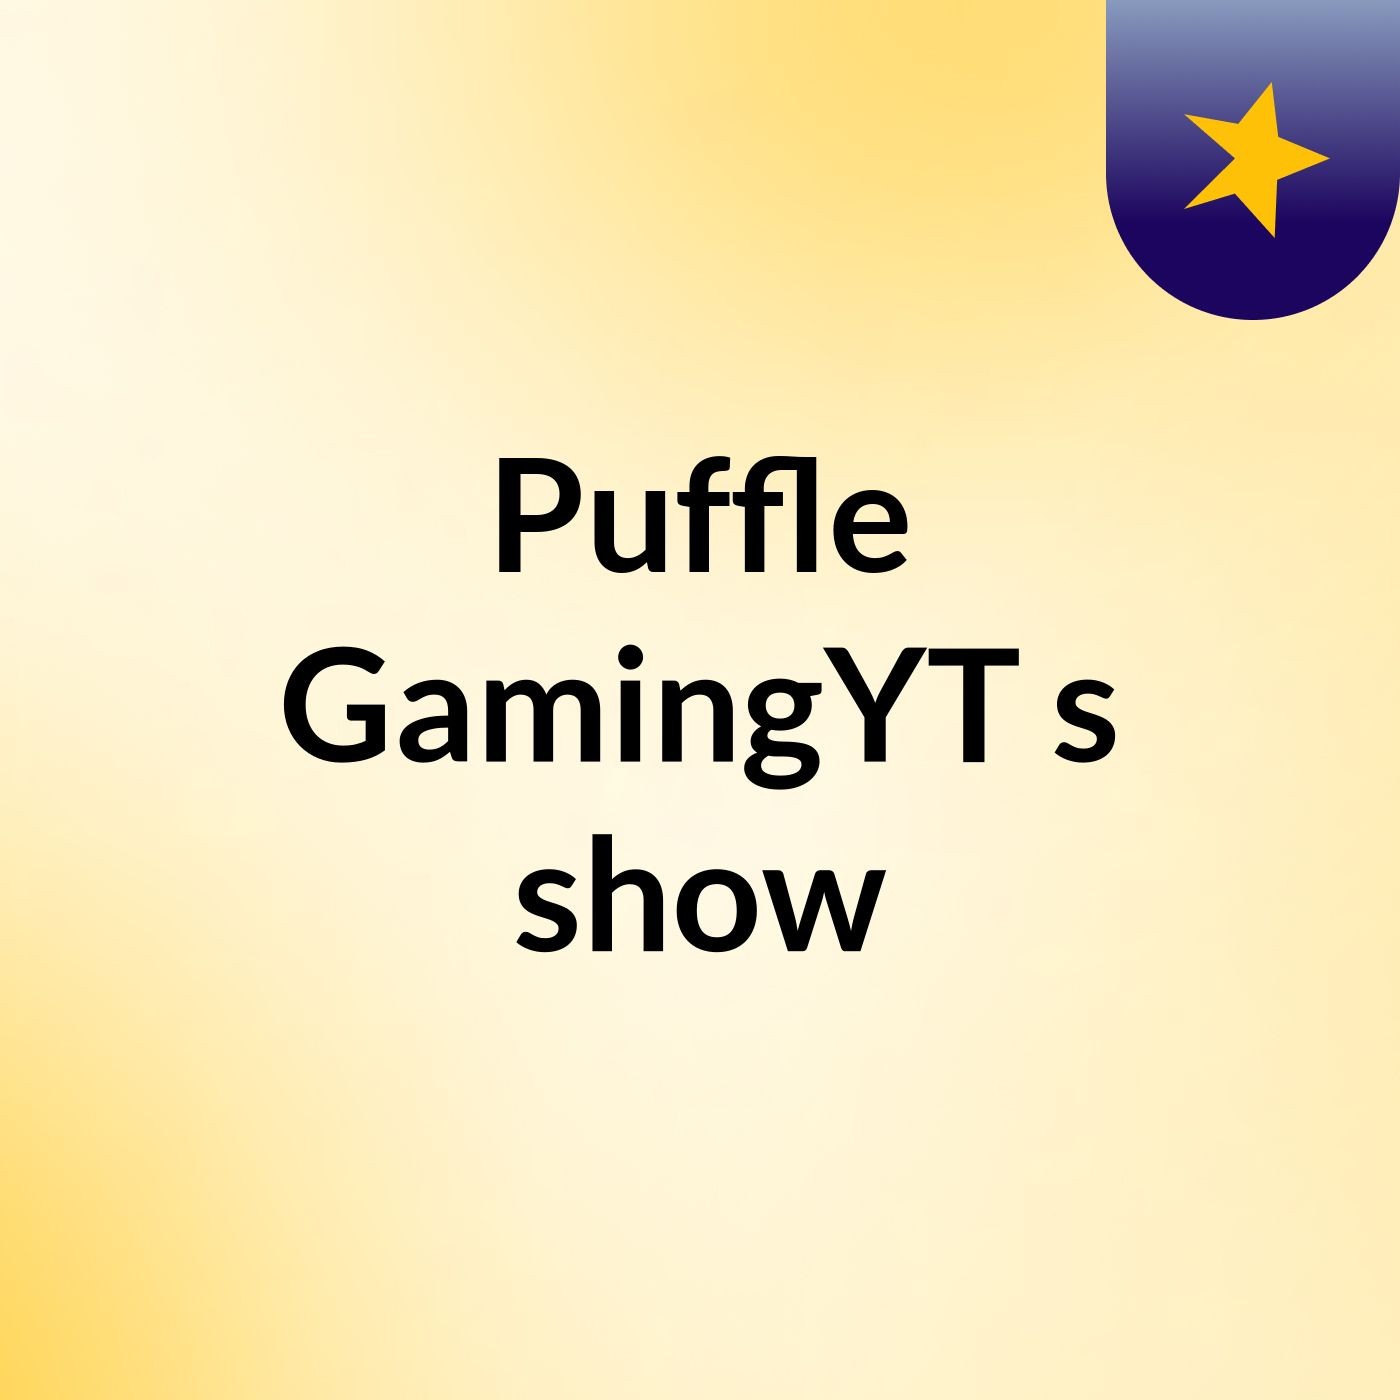 Puffle GamingYT's show